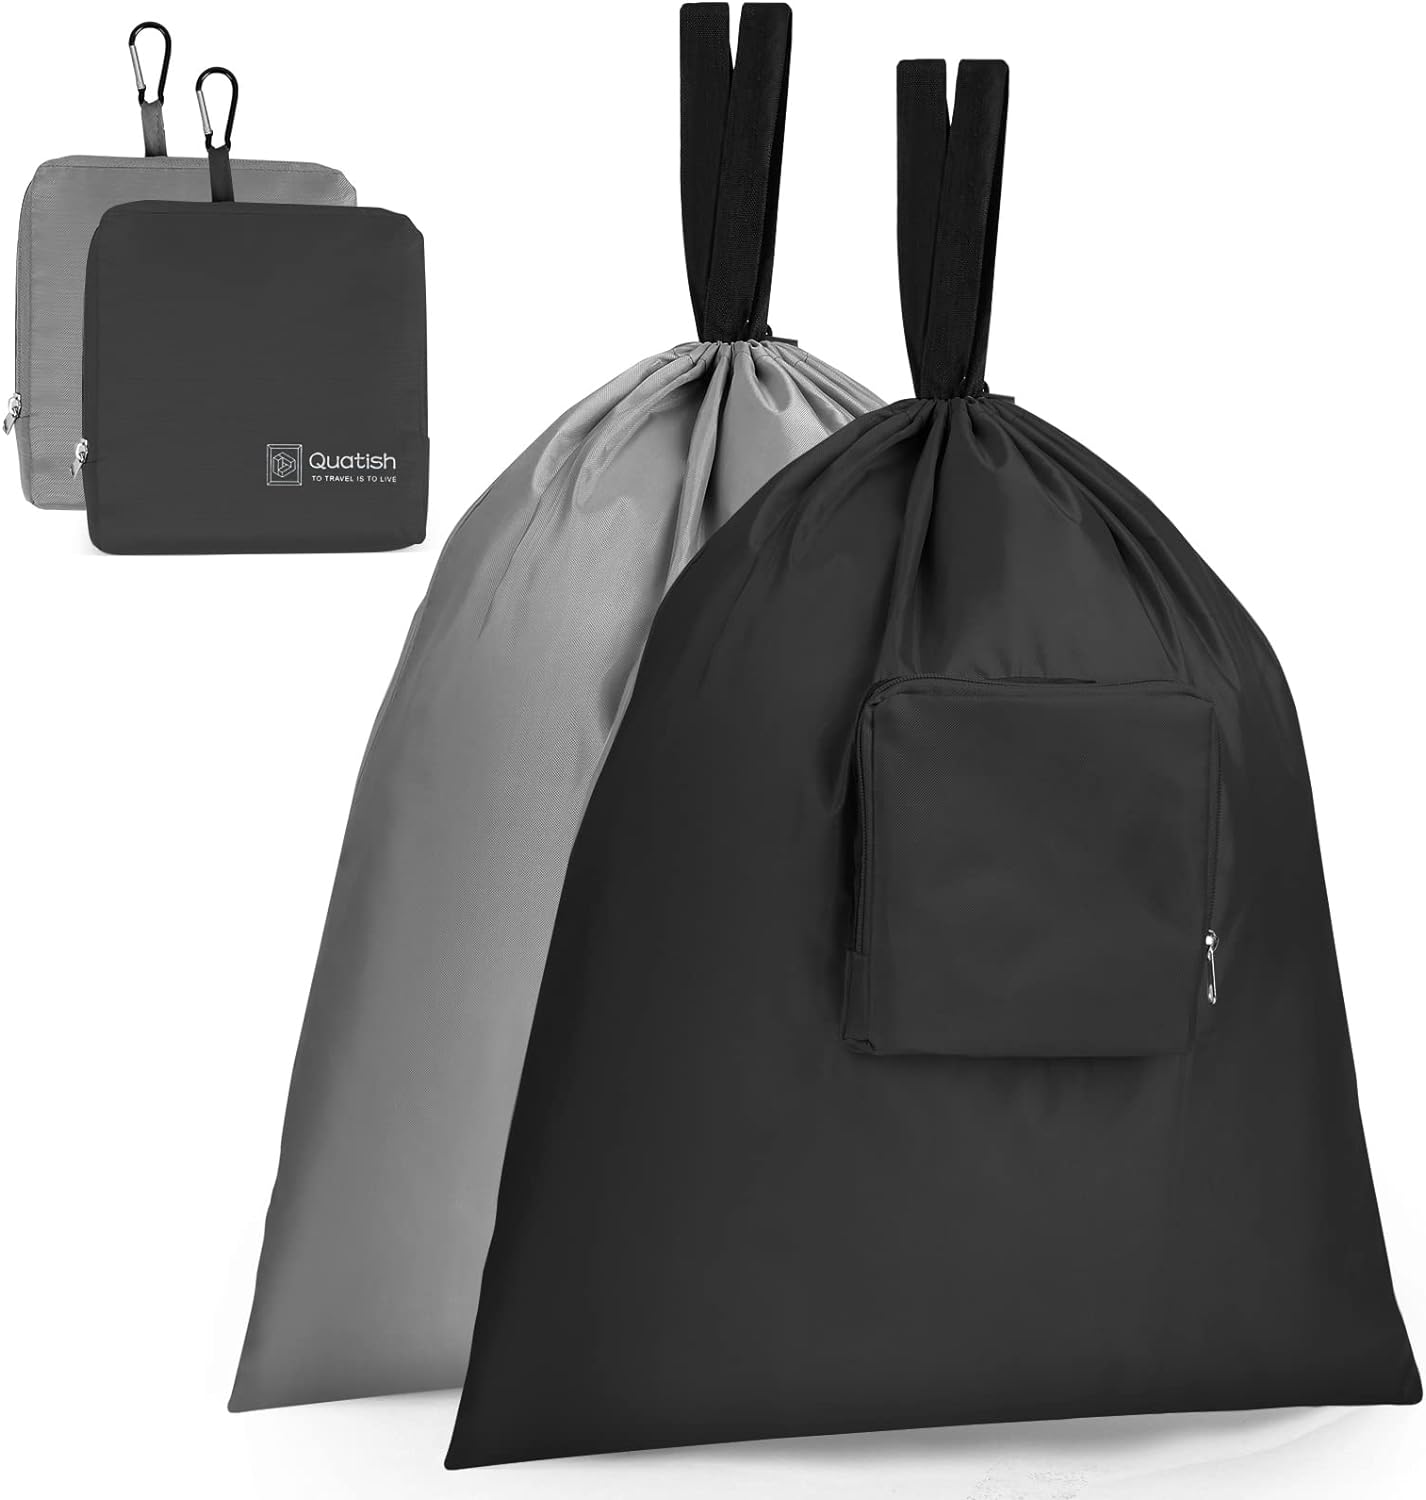 2 portable travel laundry bags, black and gray